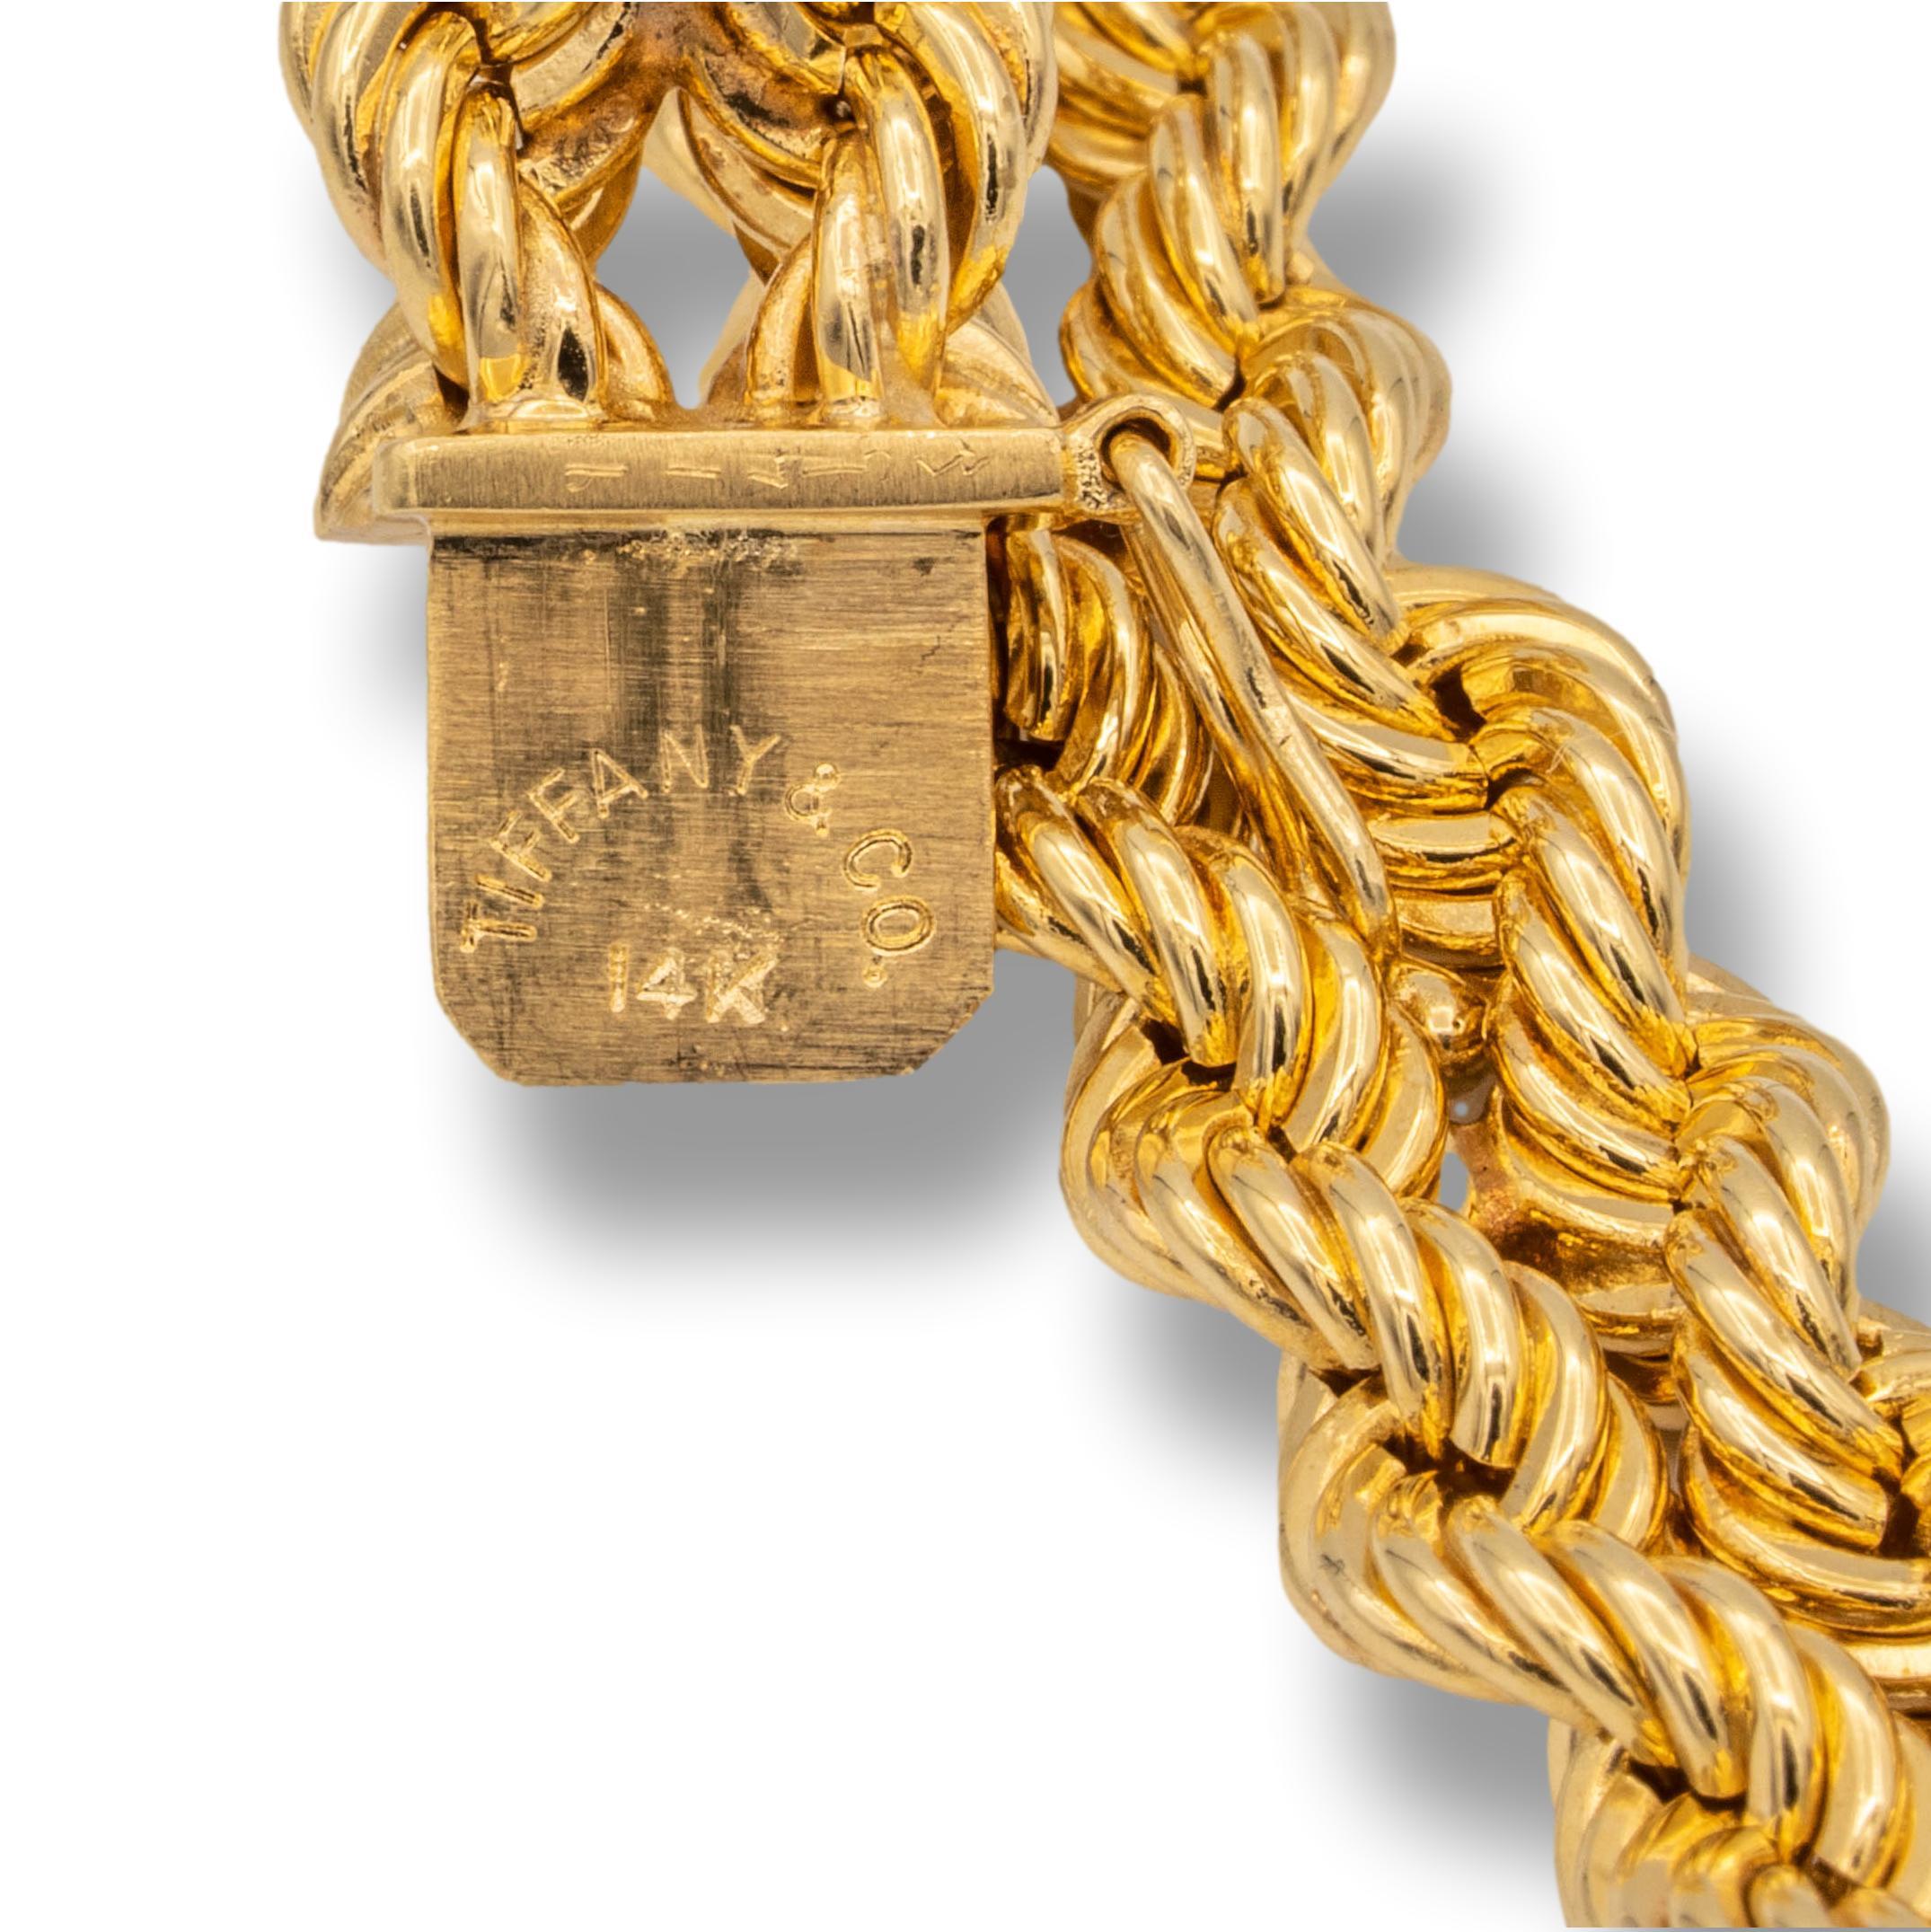 Tiffany & Co. Vintage bracelet from the 1950's finely crafted in 14 karat yellow gold with two rows of twisted rope strands with a push-down large tongue clasp closure with figure-eight for extra safety. Bracelet measures 7